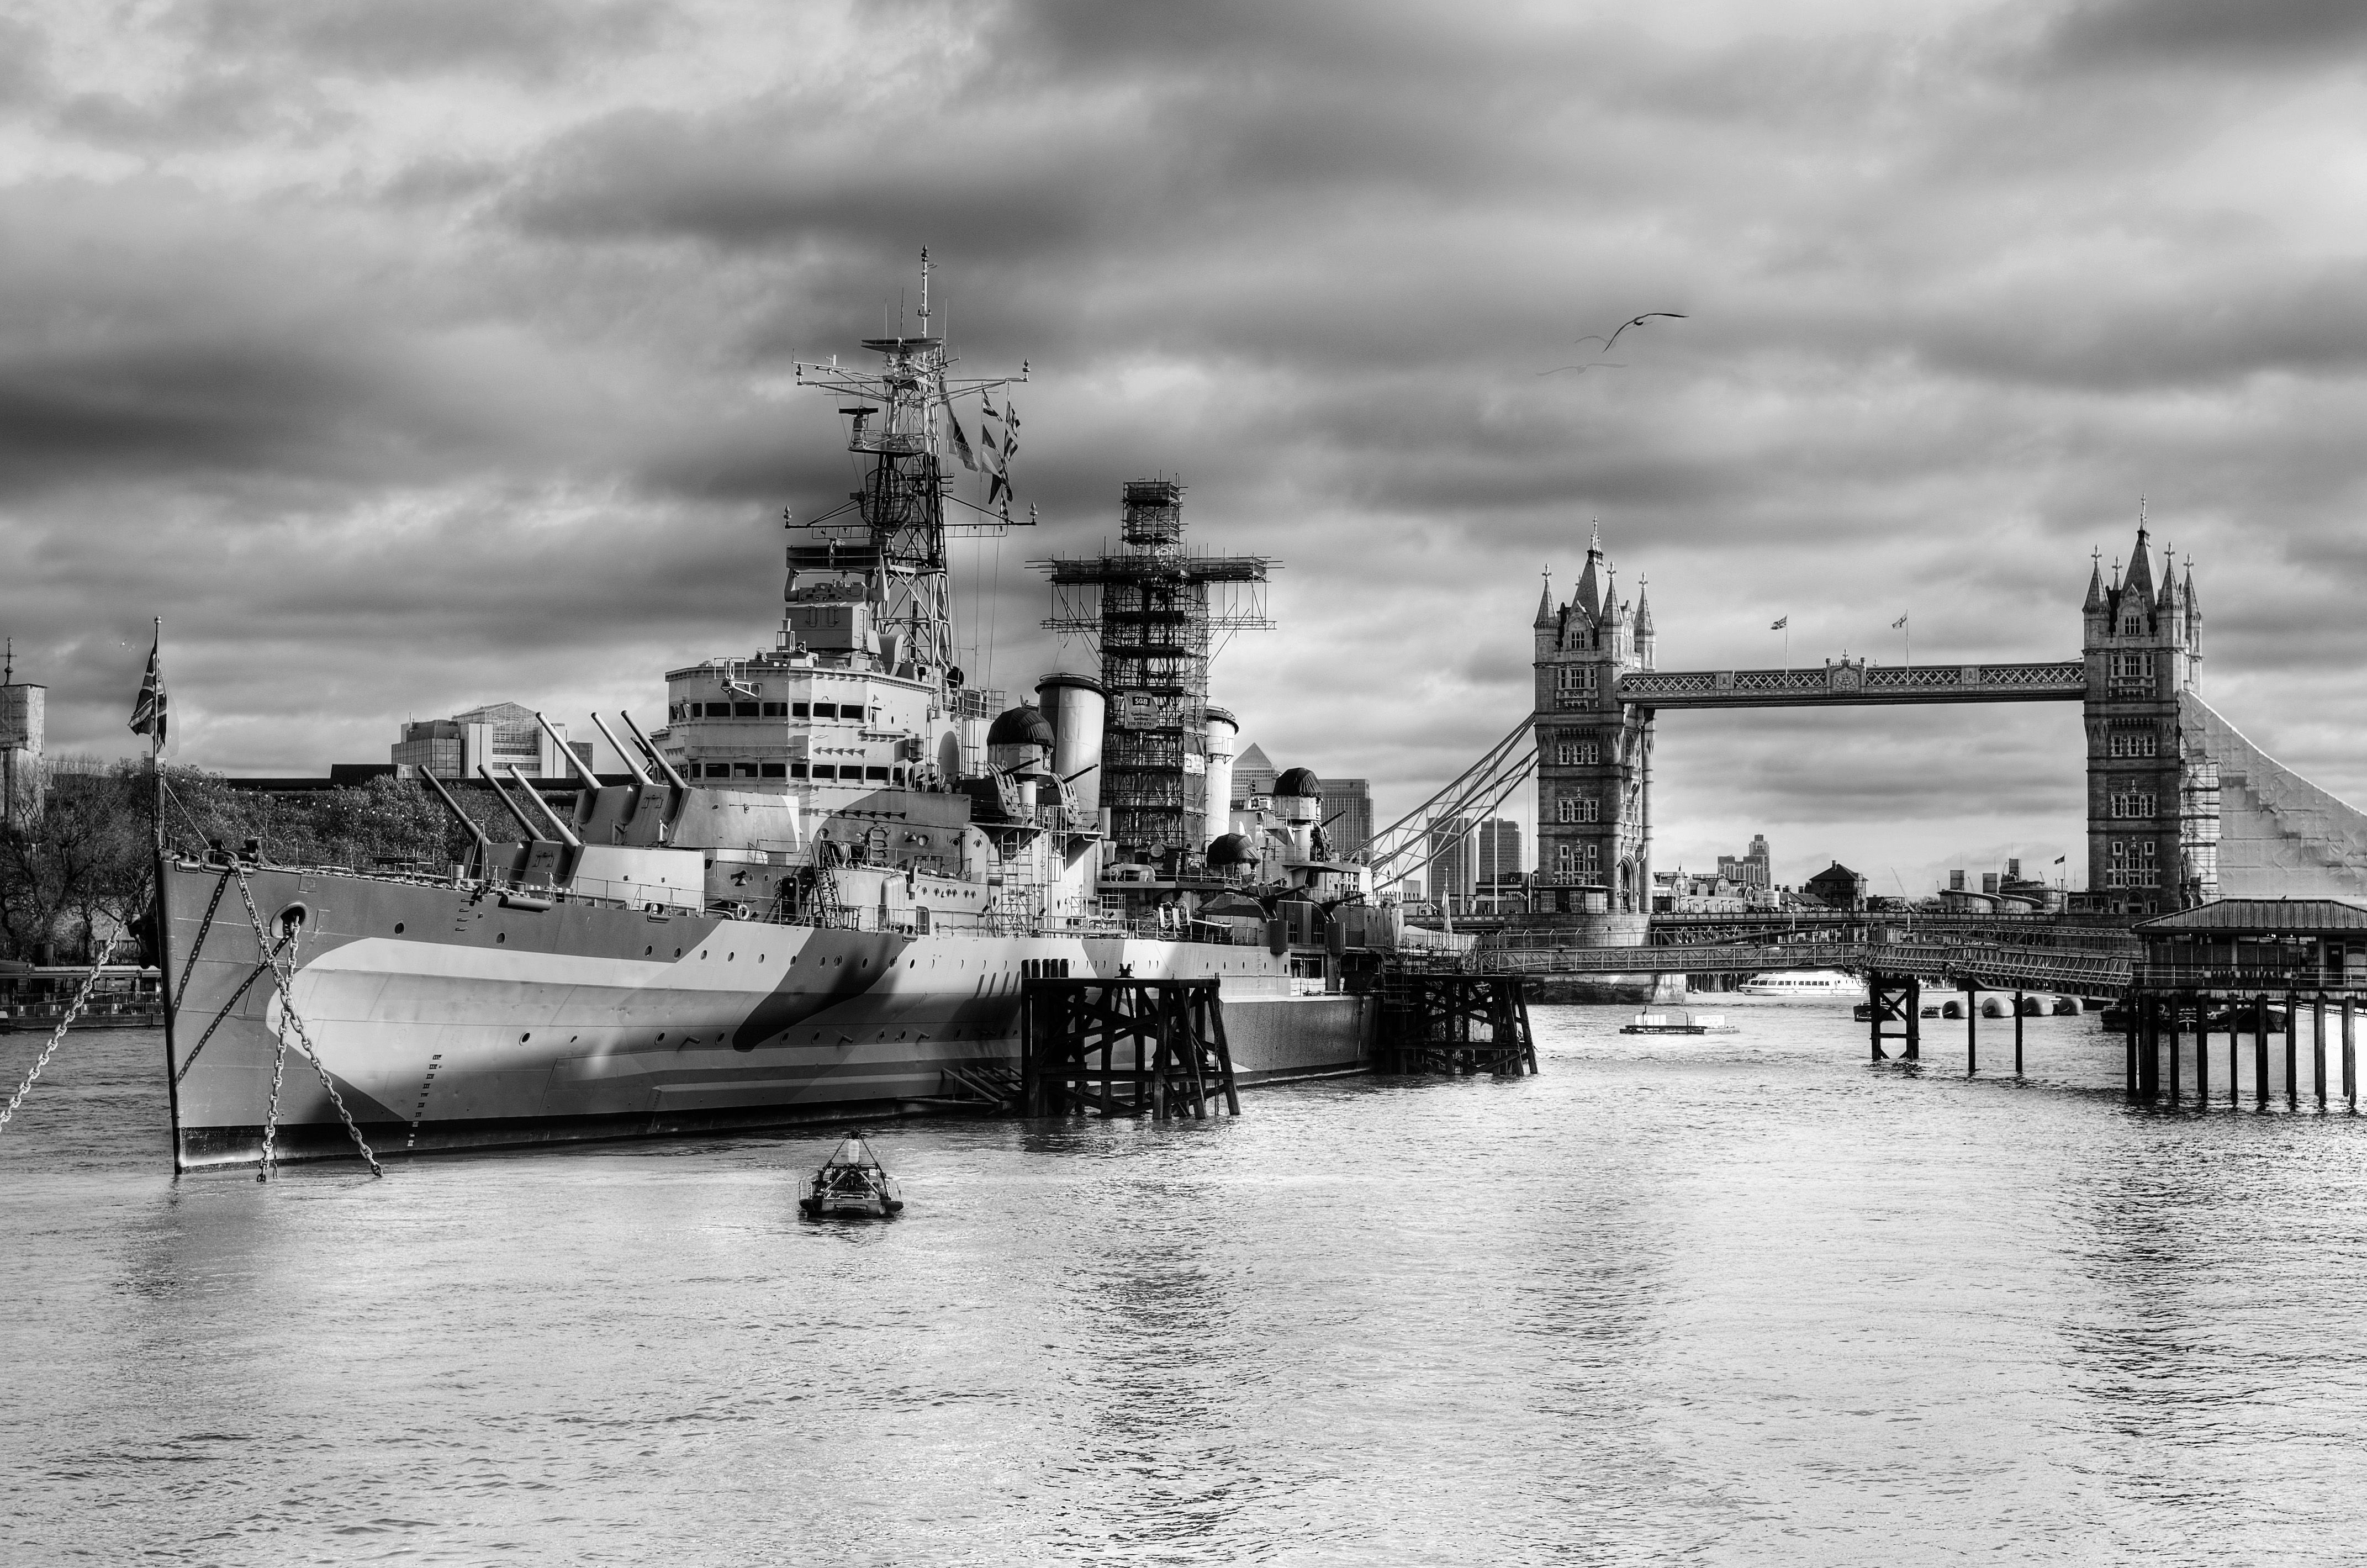 Download Wallpaper, Download 1024x768 old ships london 4286x2839 wallpaper People HD Wallpaper, Hi Res People Wallpaper, High Definition Wallpaper